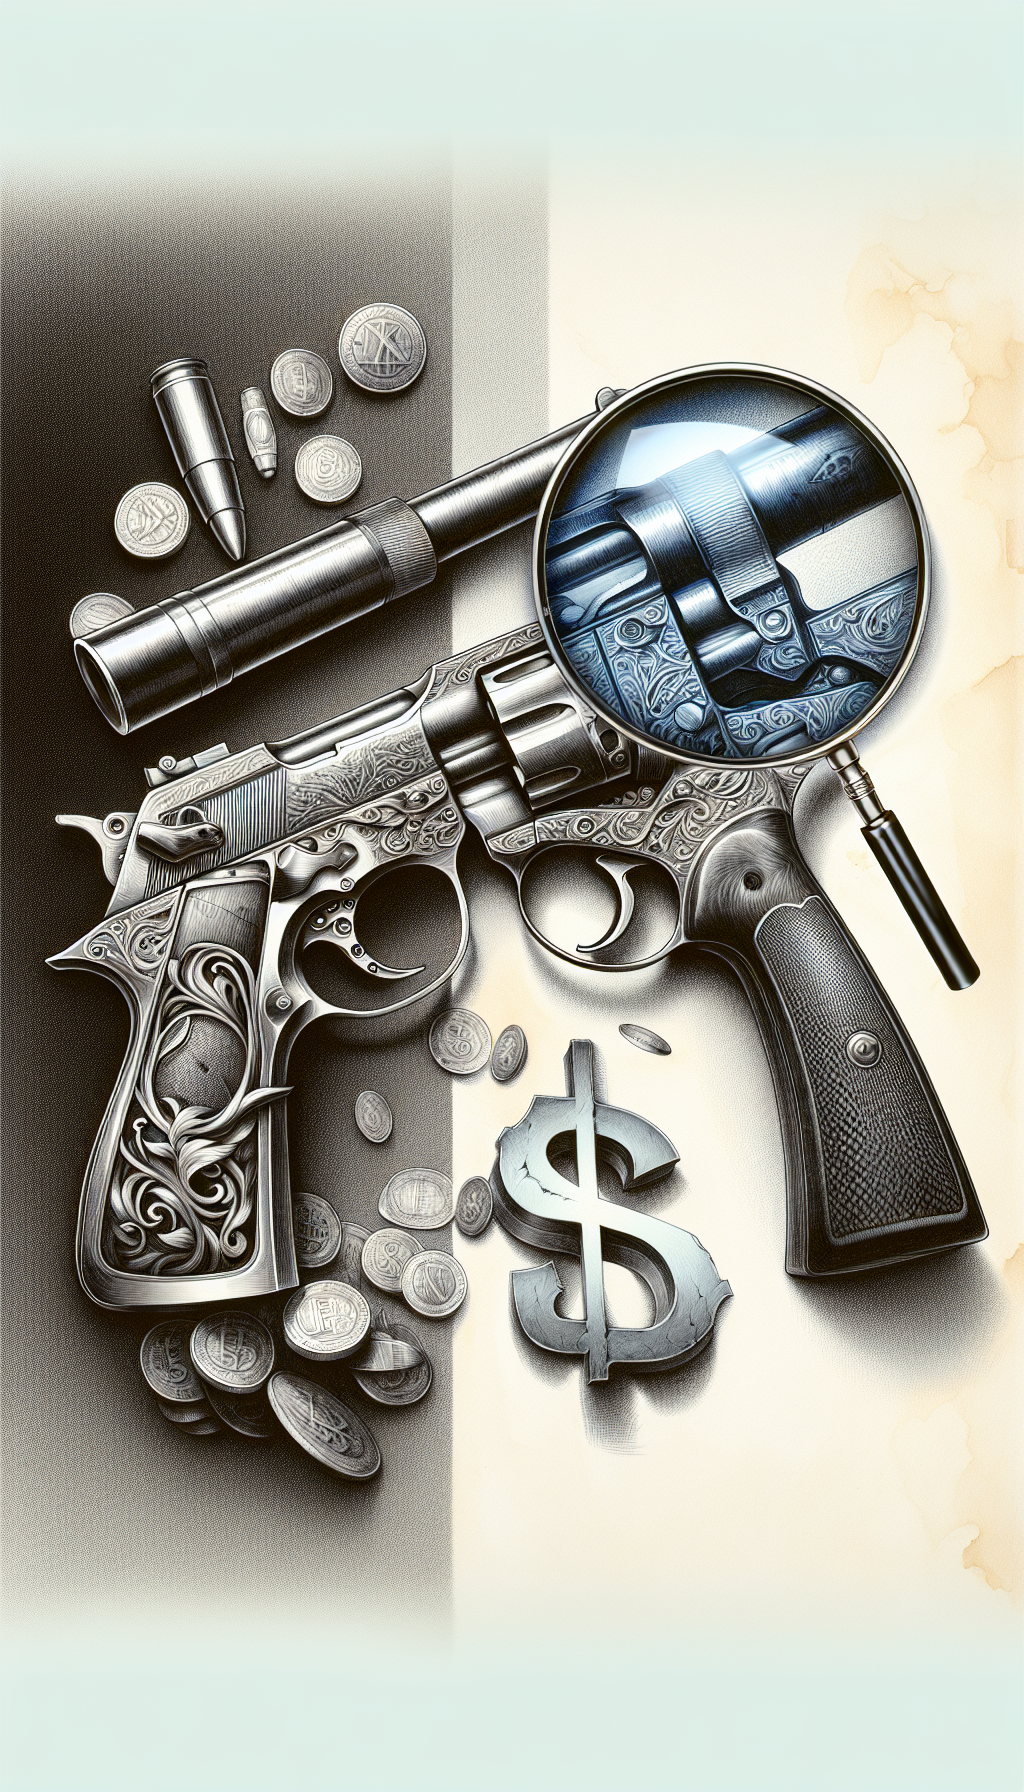 A juxtaposition of a pristine, ornate firearm with a weathered, scarred counterpart, side by side, under a magnifying glass that highlights the marks of aging and battle on the latter. The glass reveals the history and authenticity of the weapon, overlaying the image with floating dollar signs to signify its value, moving in style from photorealistic to sketch-like from left to right.